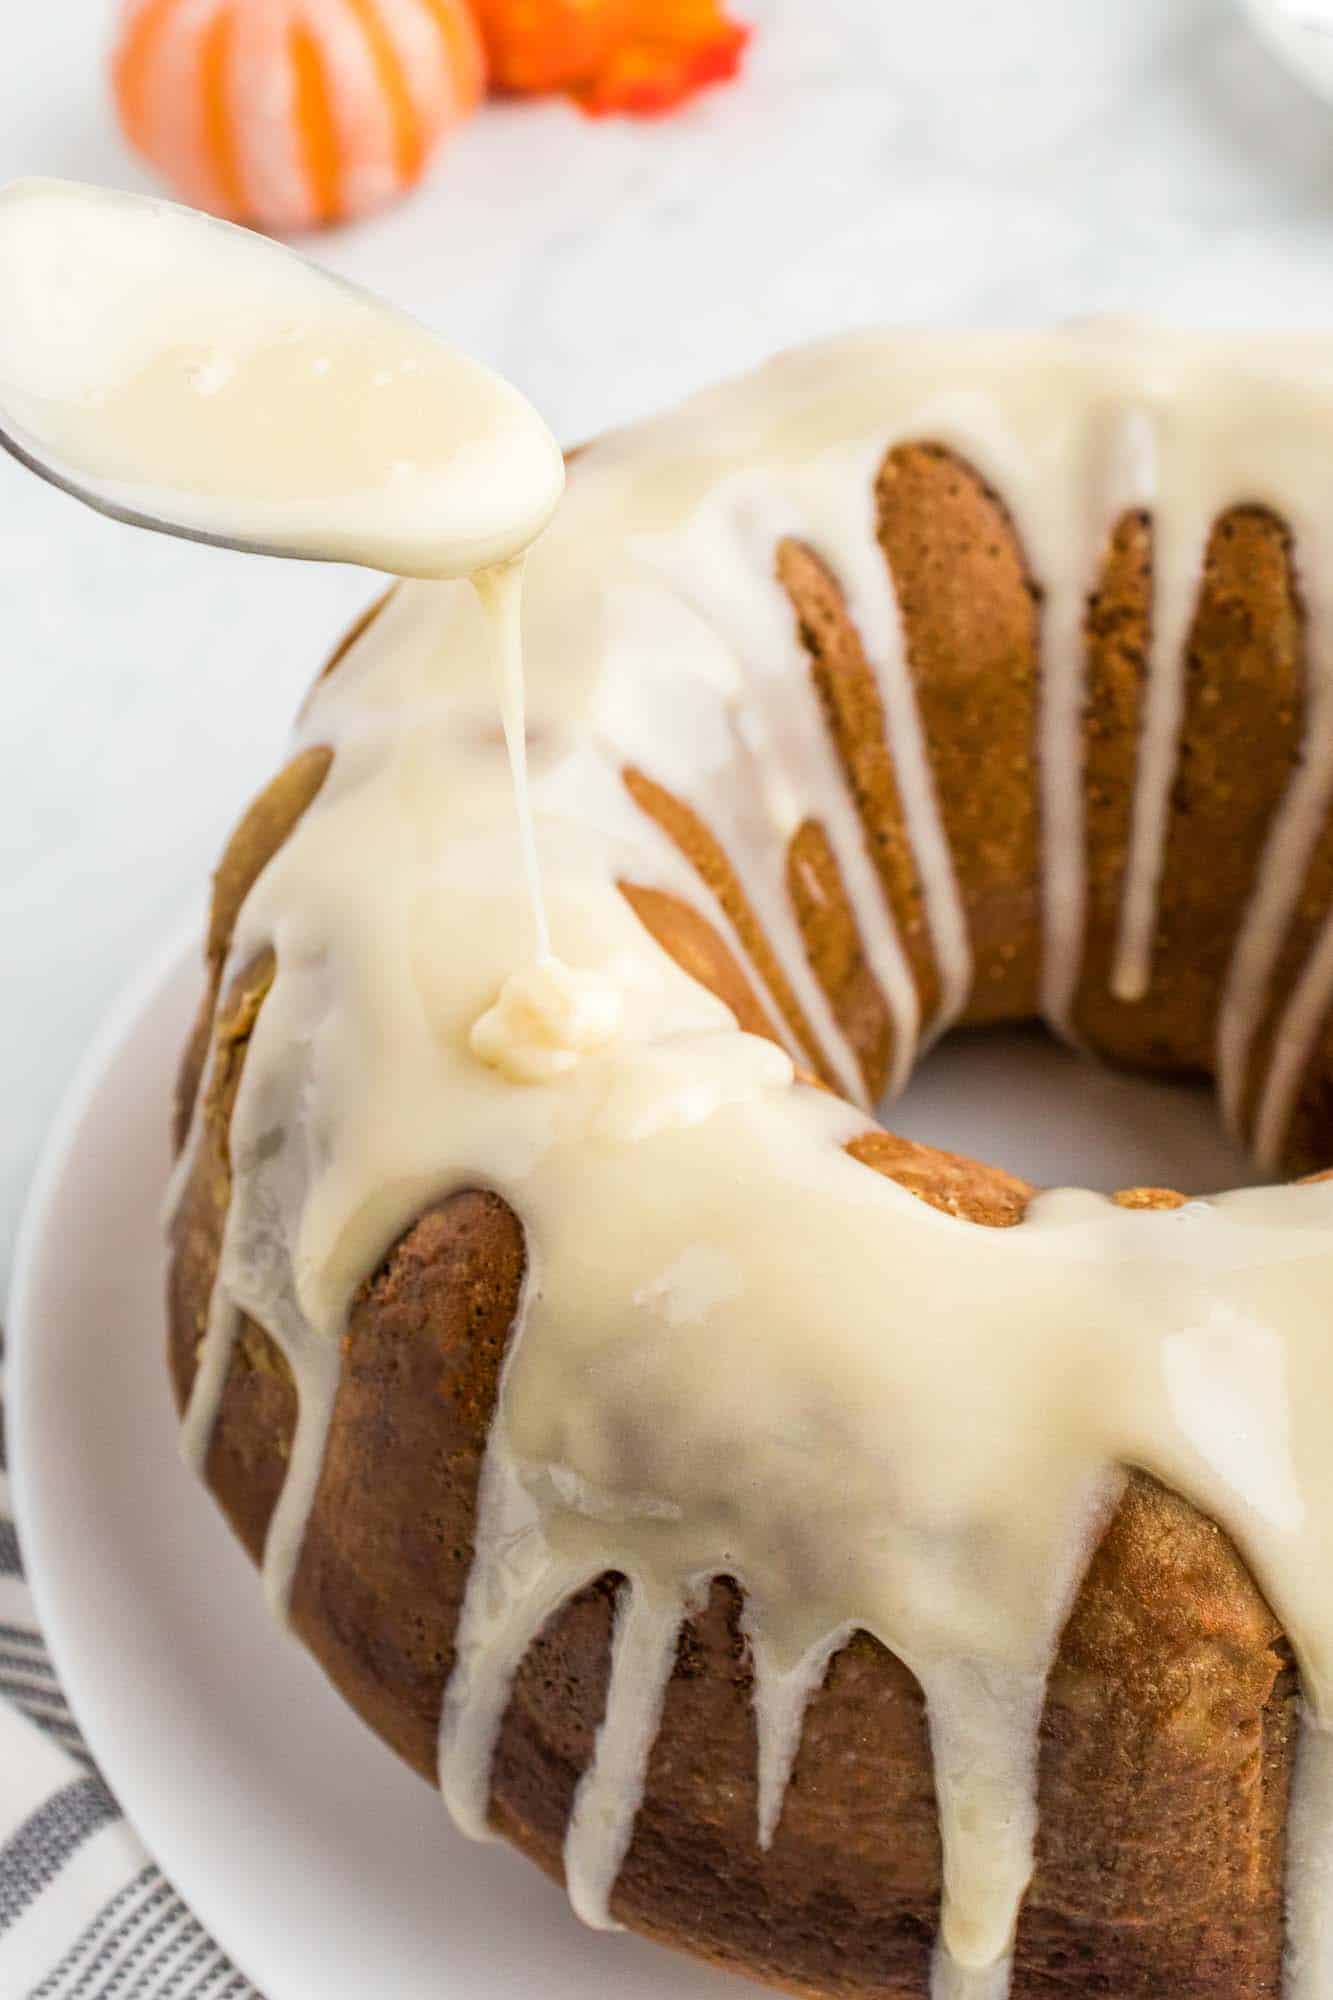 Drizzling the pumpkin bundt cake with cream cheese frosting/drizzle